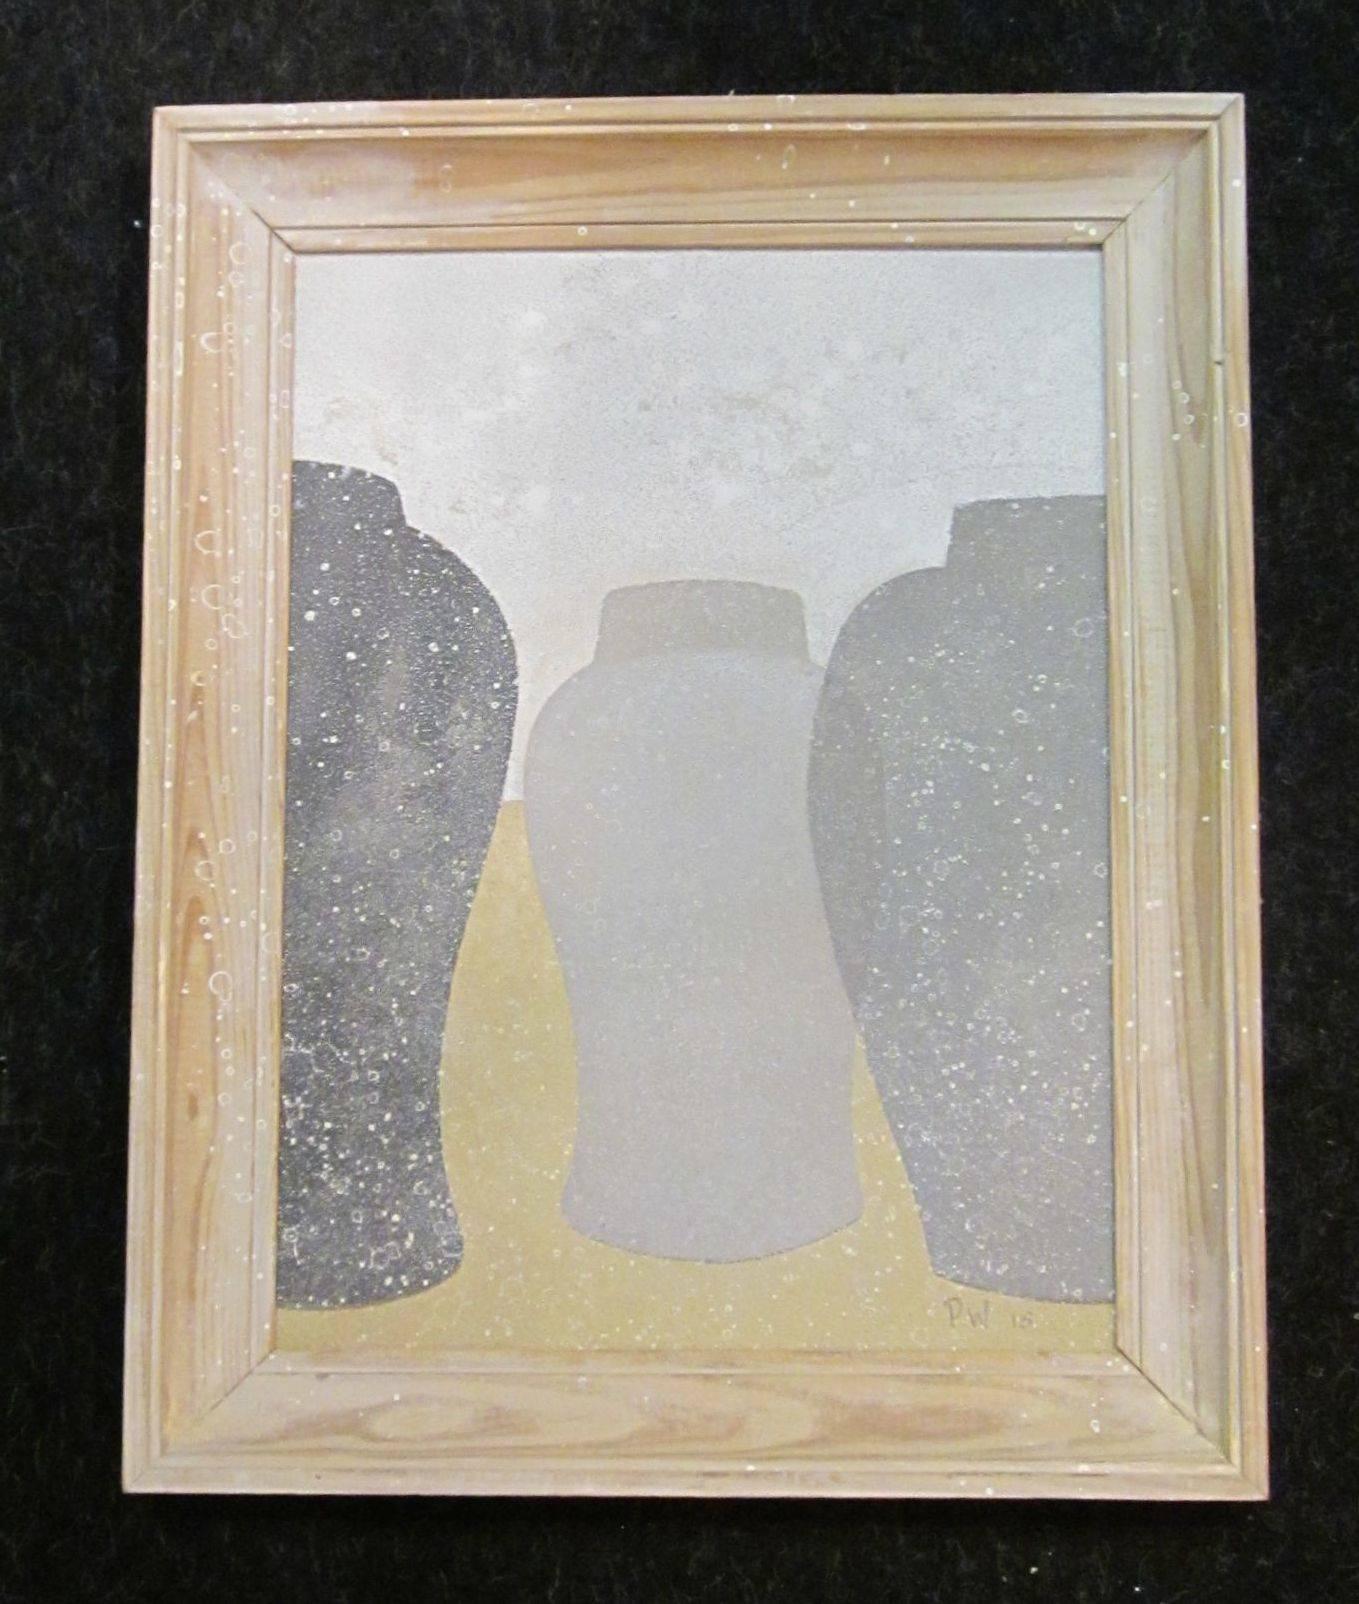 Contemporary painting of three vases by English artist Peter Woodward.
The artist is known for his unique paintings of vases in antique style frames.
Acrylic paint on board in a wooden frame.
 